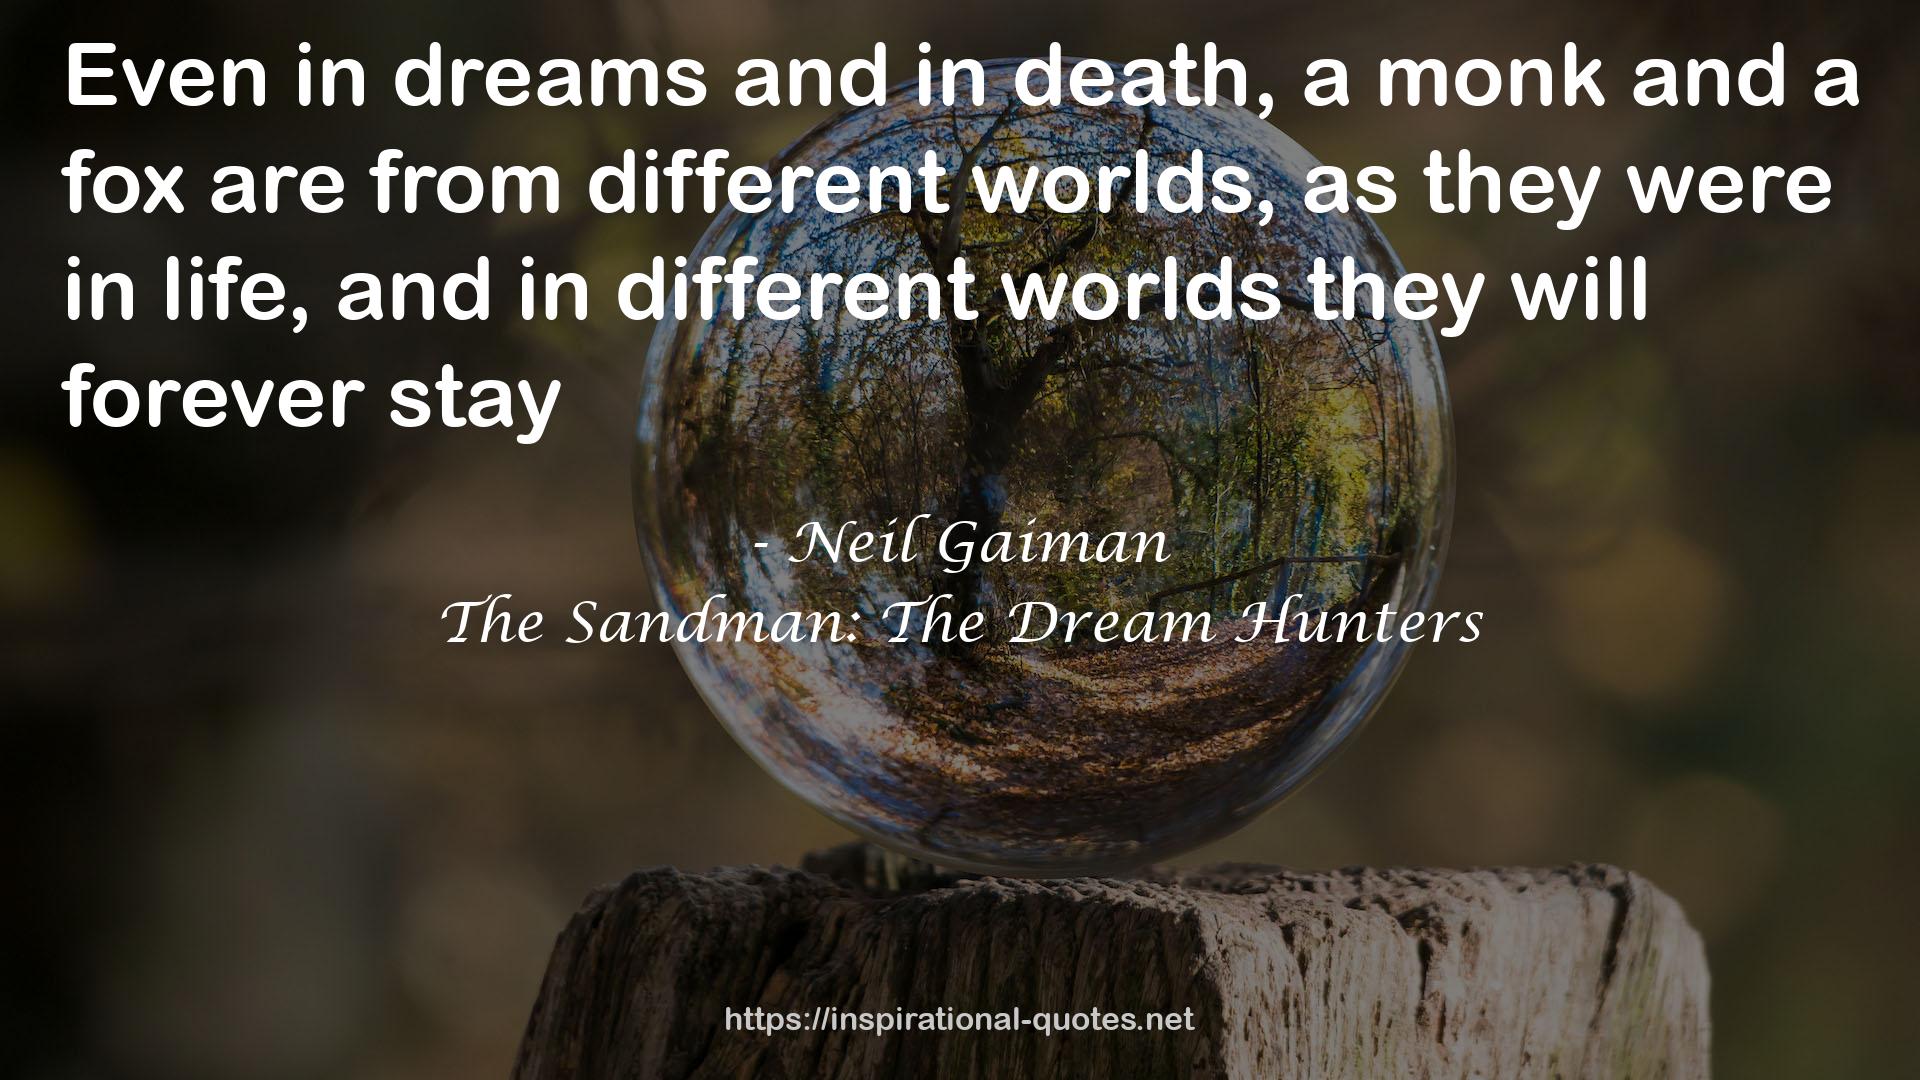 The Sandman: The Dream Hunters QUOTES